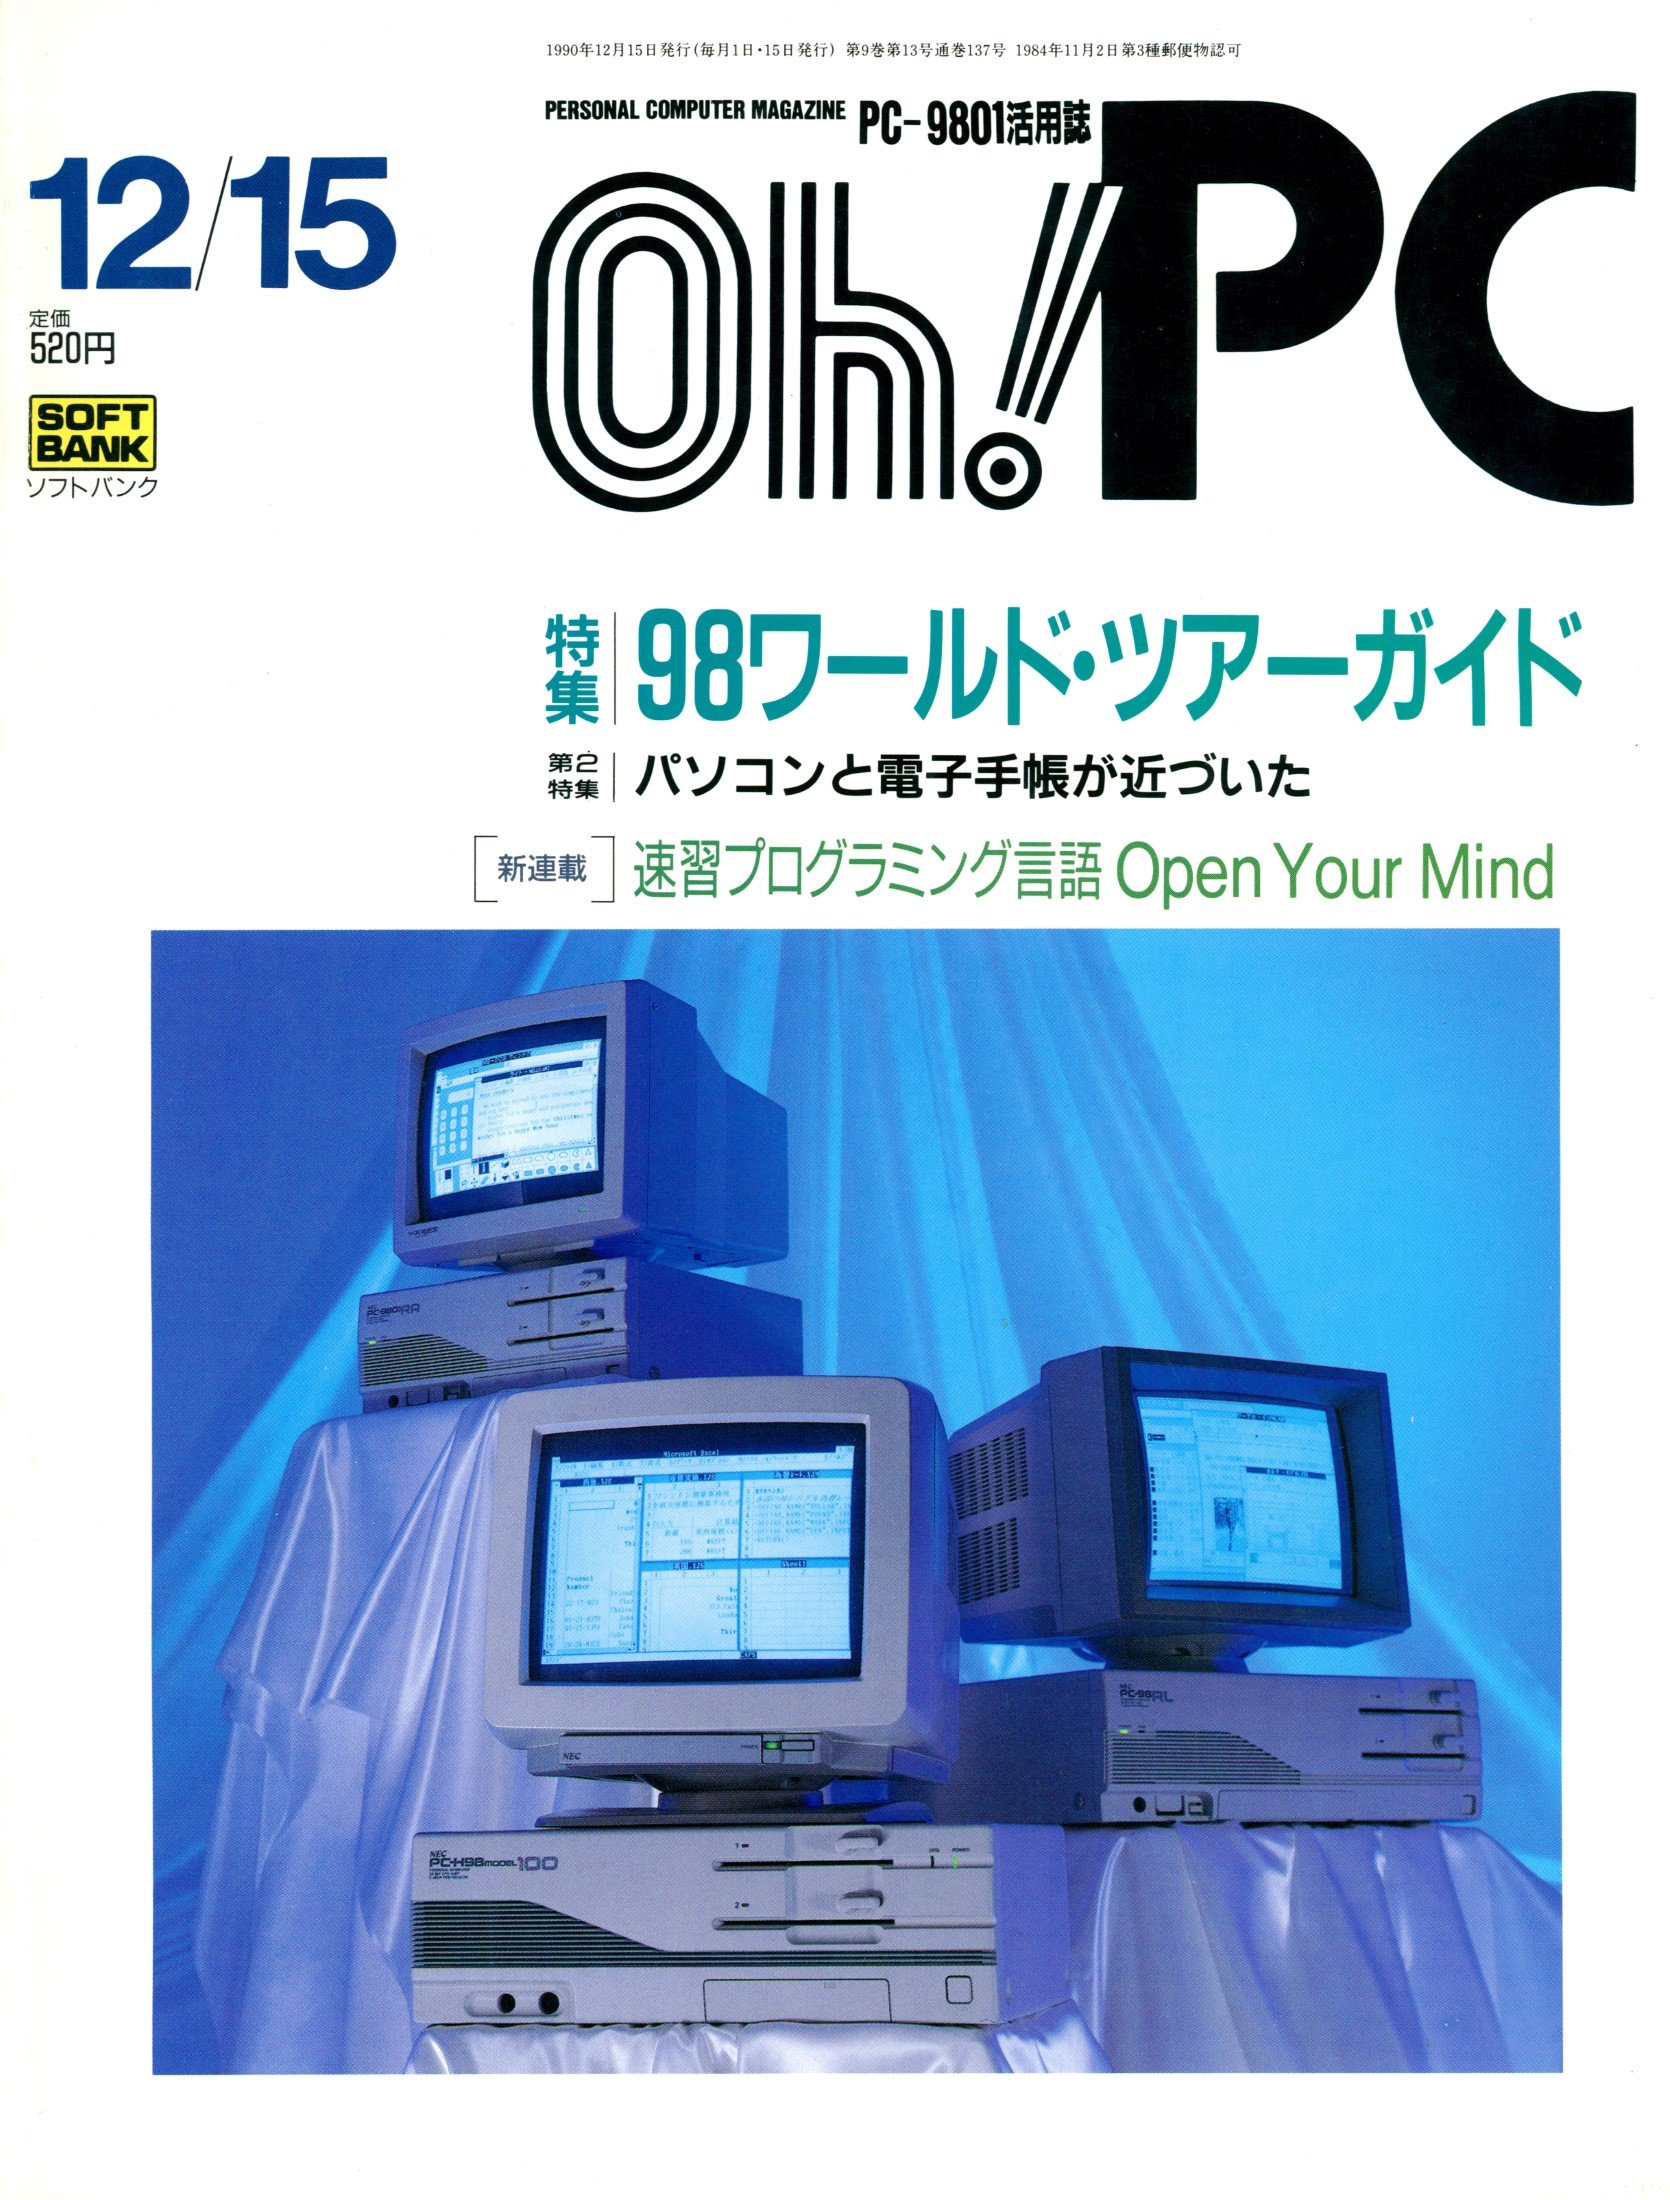 Oh! PC Issue 137 (Dec 15, 1990)